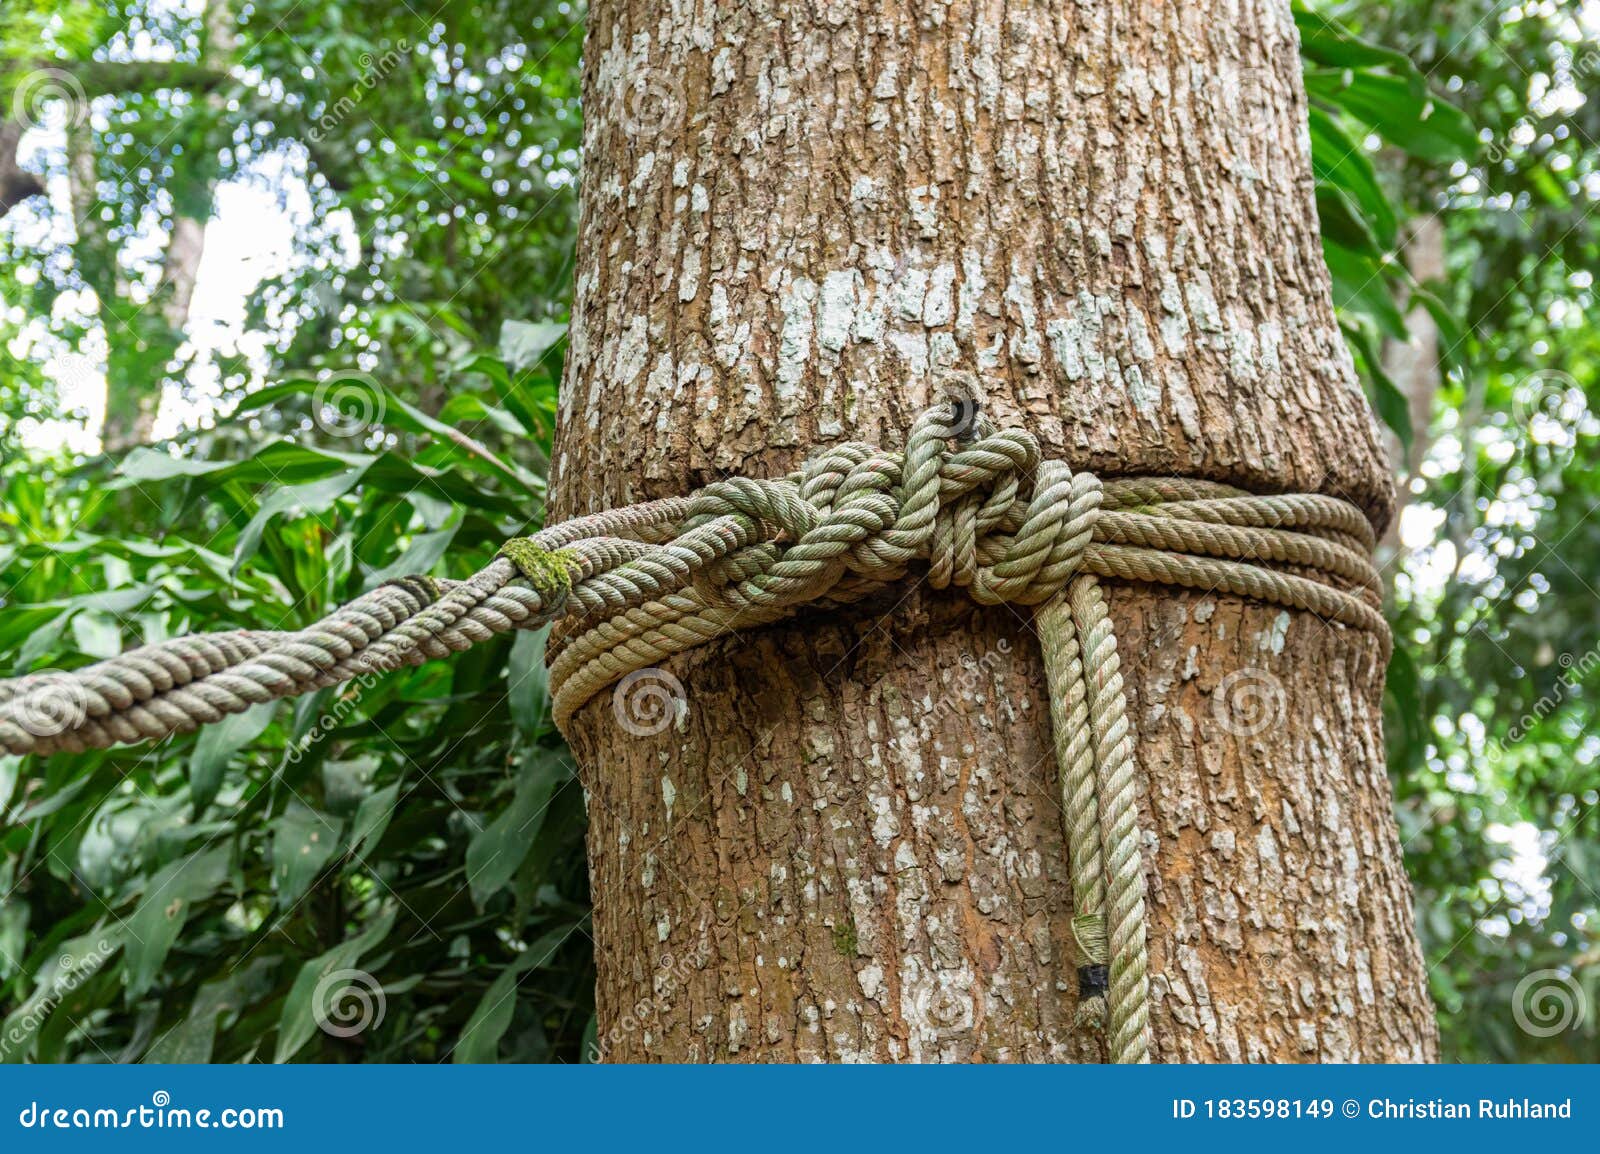 Picture of a Tree with a Rope Wrapped Around it Stock Image - Image of  beauty, nature: 183598149